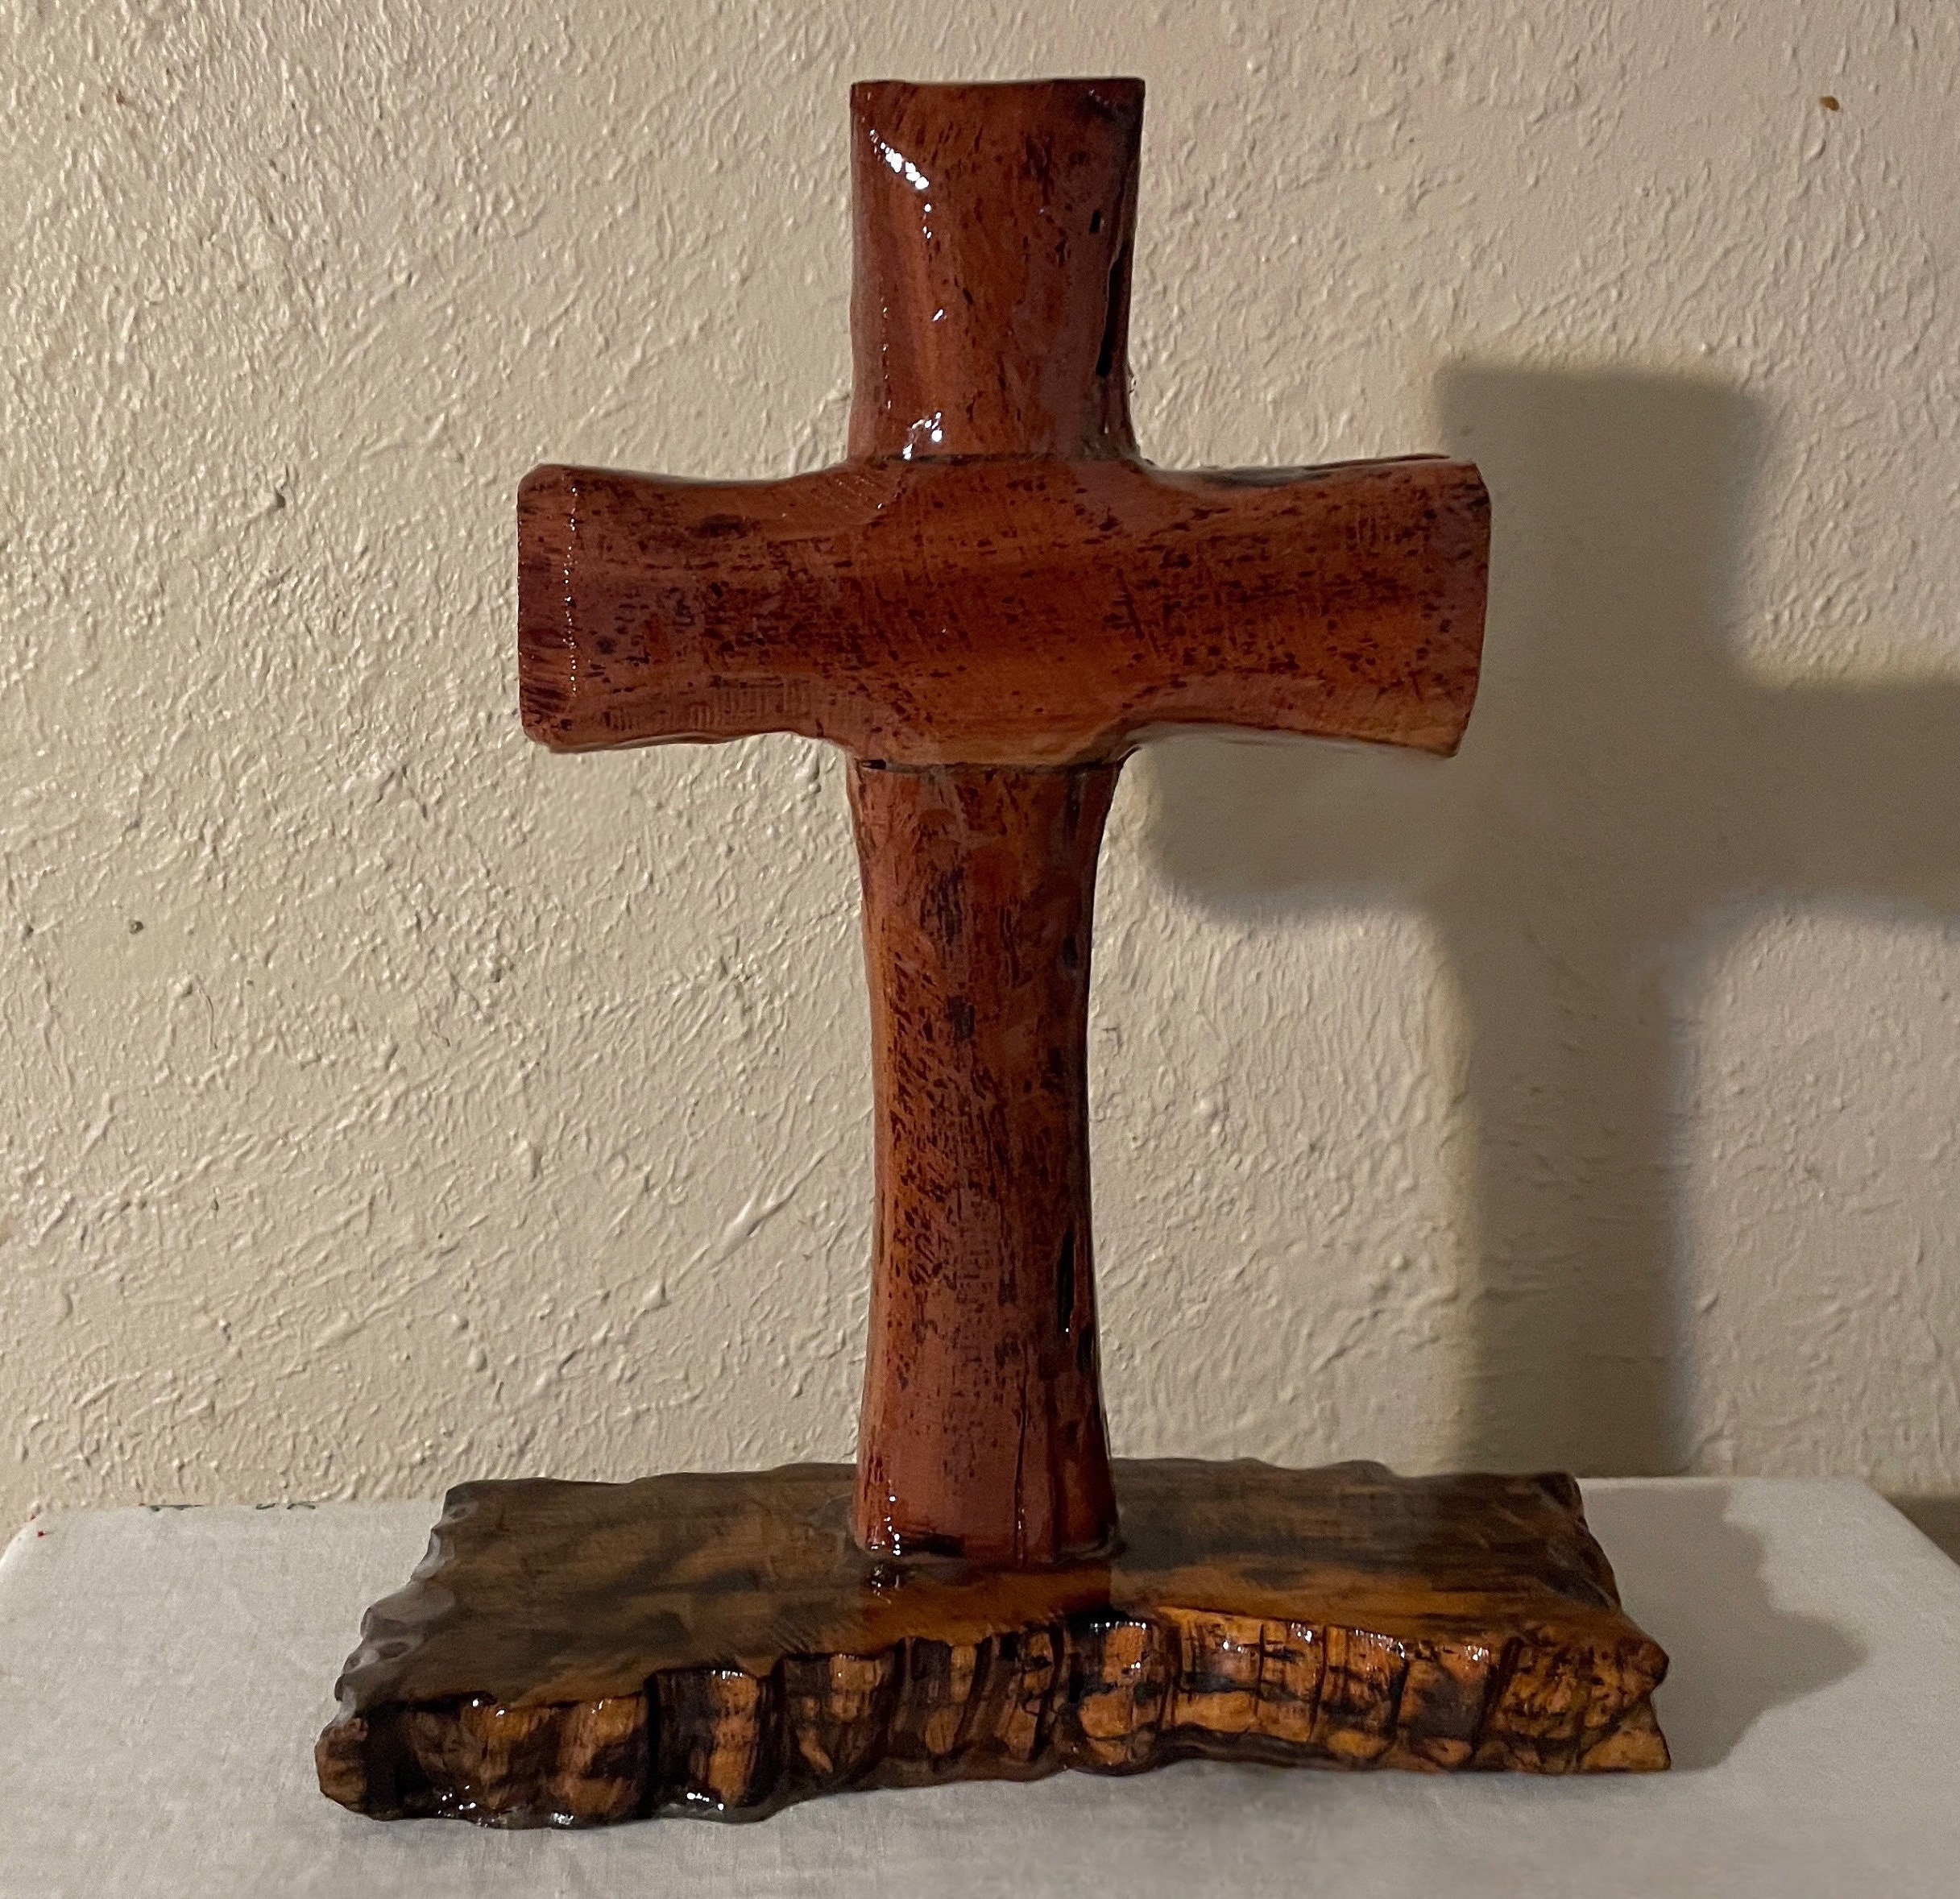 AshBro Inc. Handcrafted Holy Wood Cross Mantle Standing Wooden Cross Perfect for Those Looking for Catholic Crosses Christian Crosses Wooden Cross